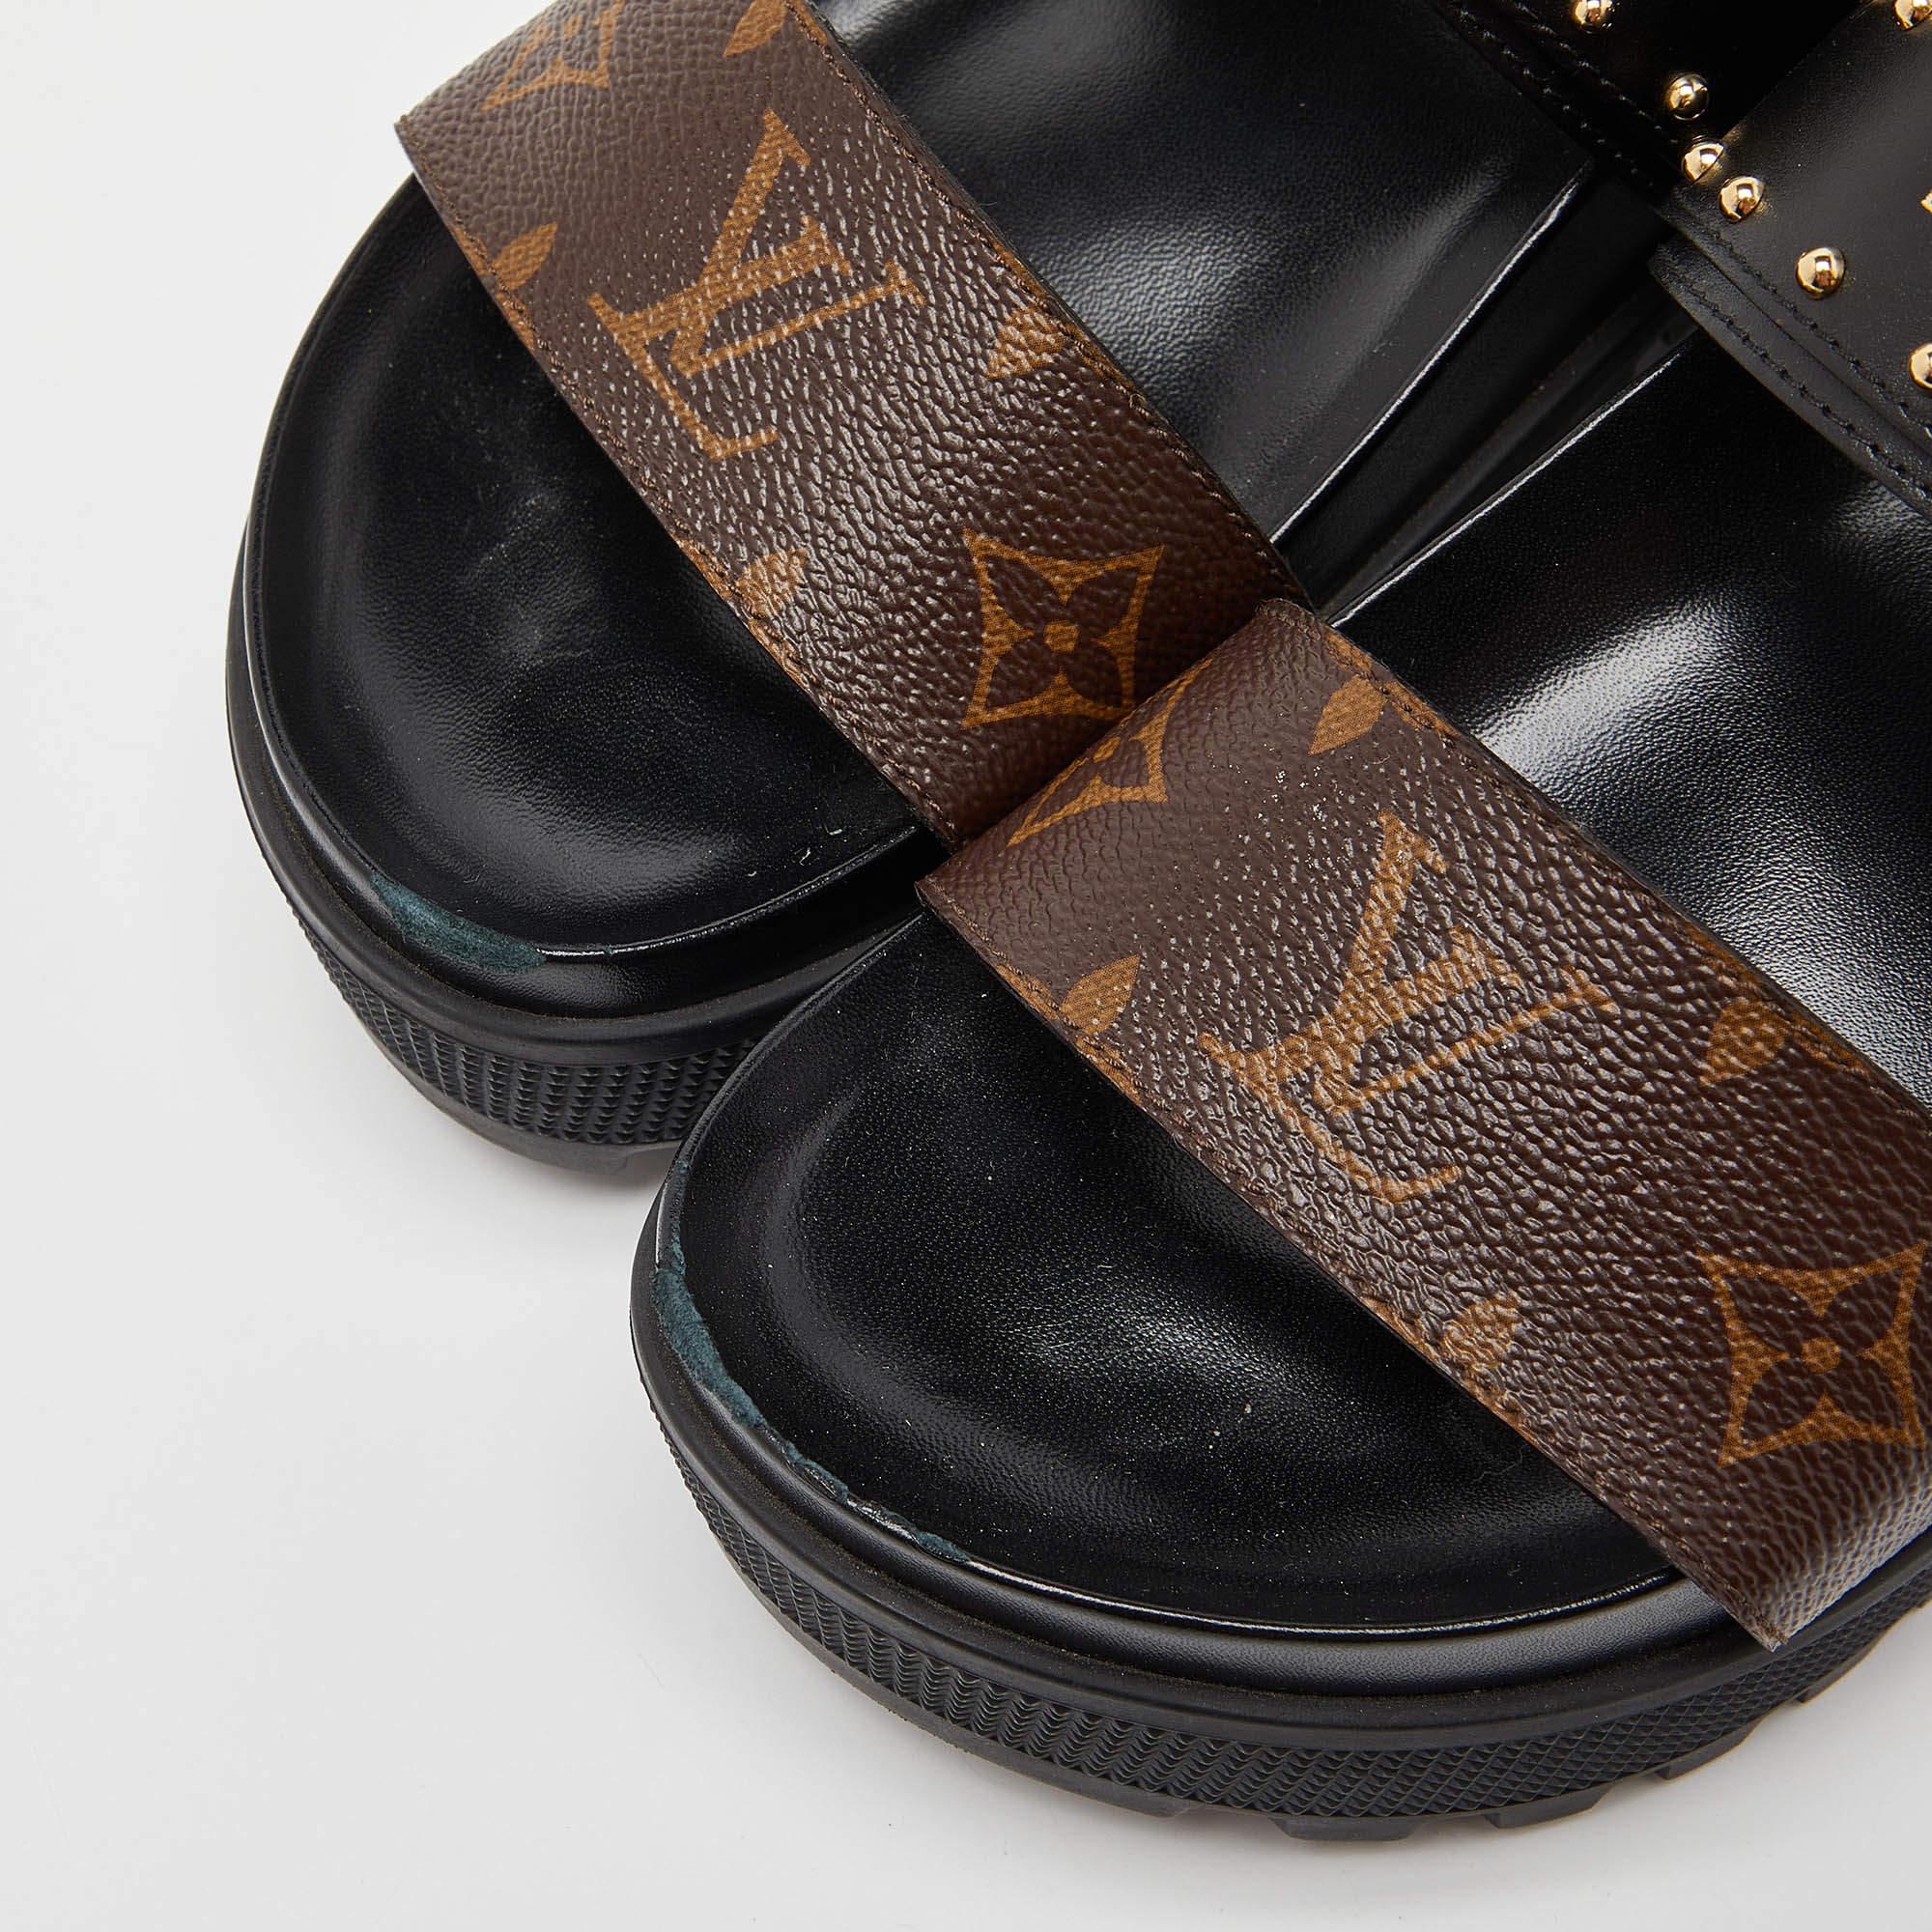 Gold-tone accents add charm to the Monogram canvas & leather exterior of these Louis Vuitton sandals. The rubber soles and heels of this pair will offer you a comfortable walking experience.

